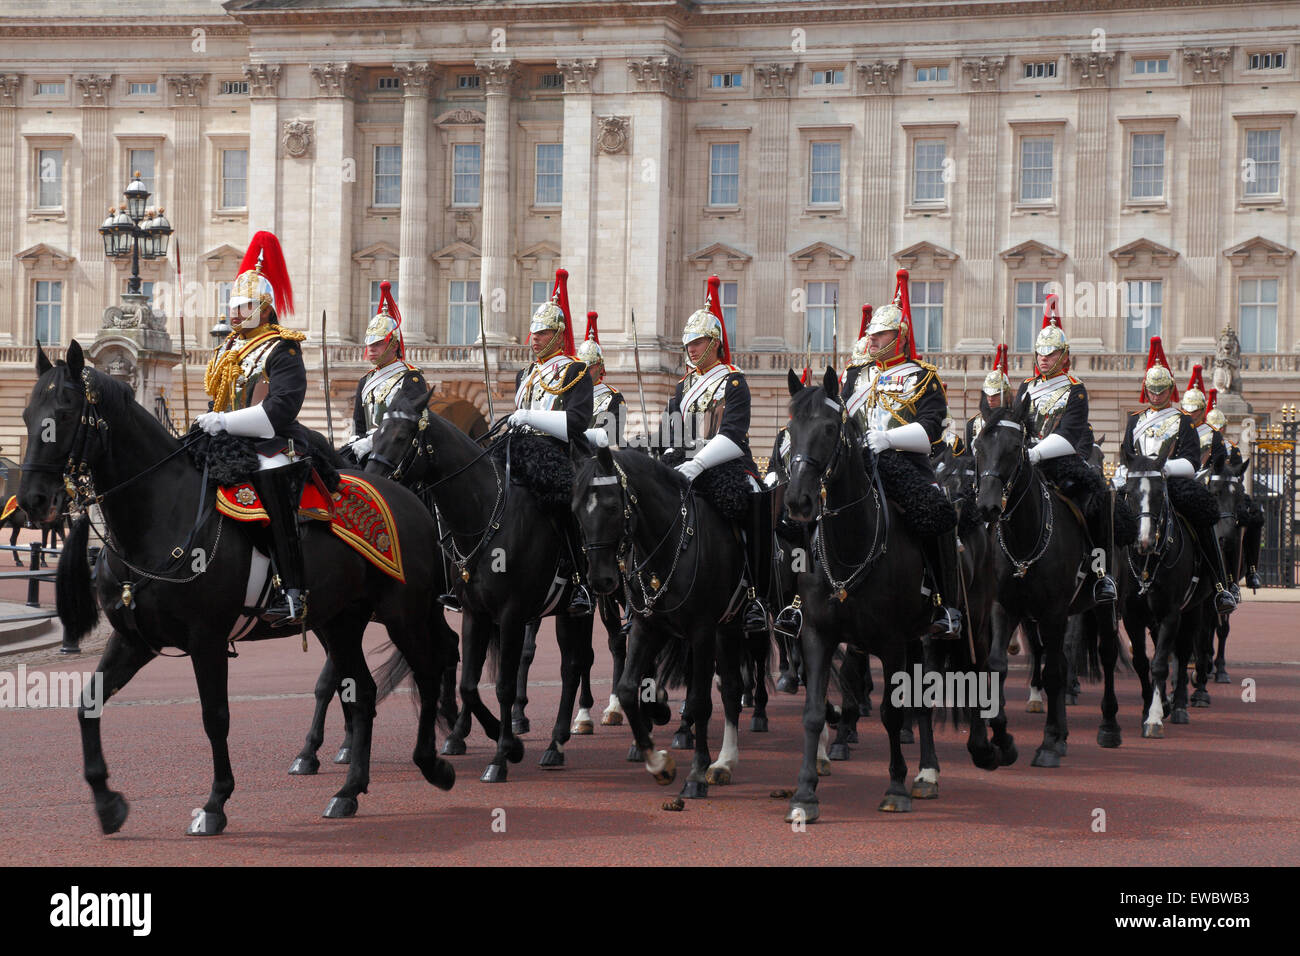 Mounted Cavalry at Buckingham Palace in London Stock Photo